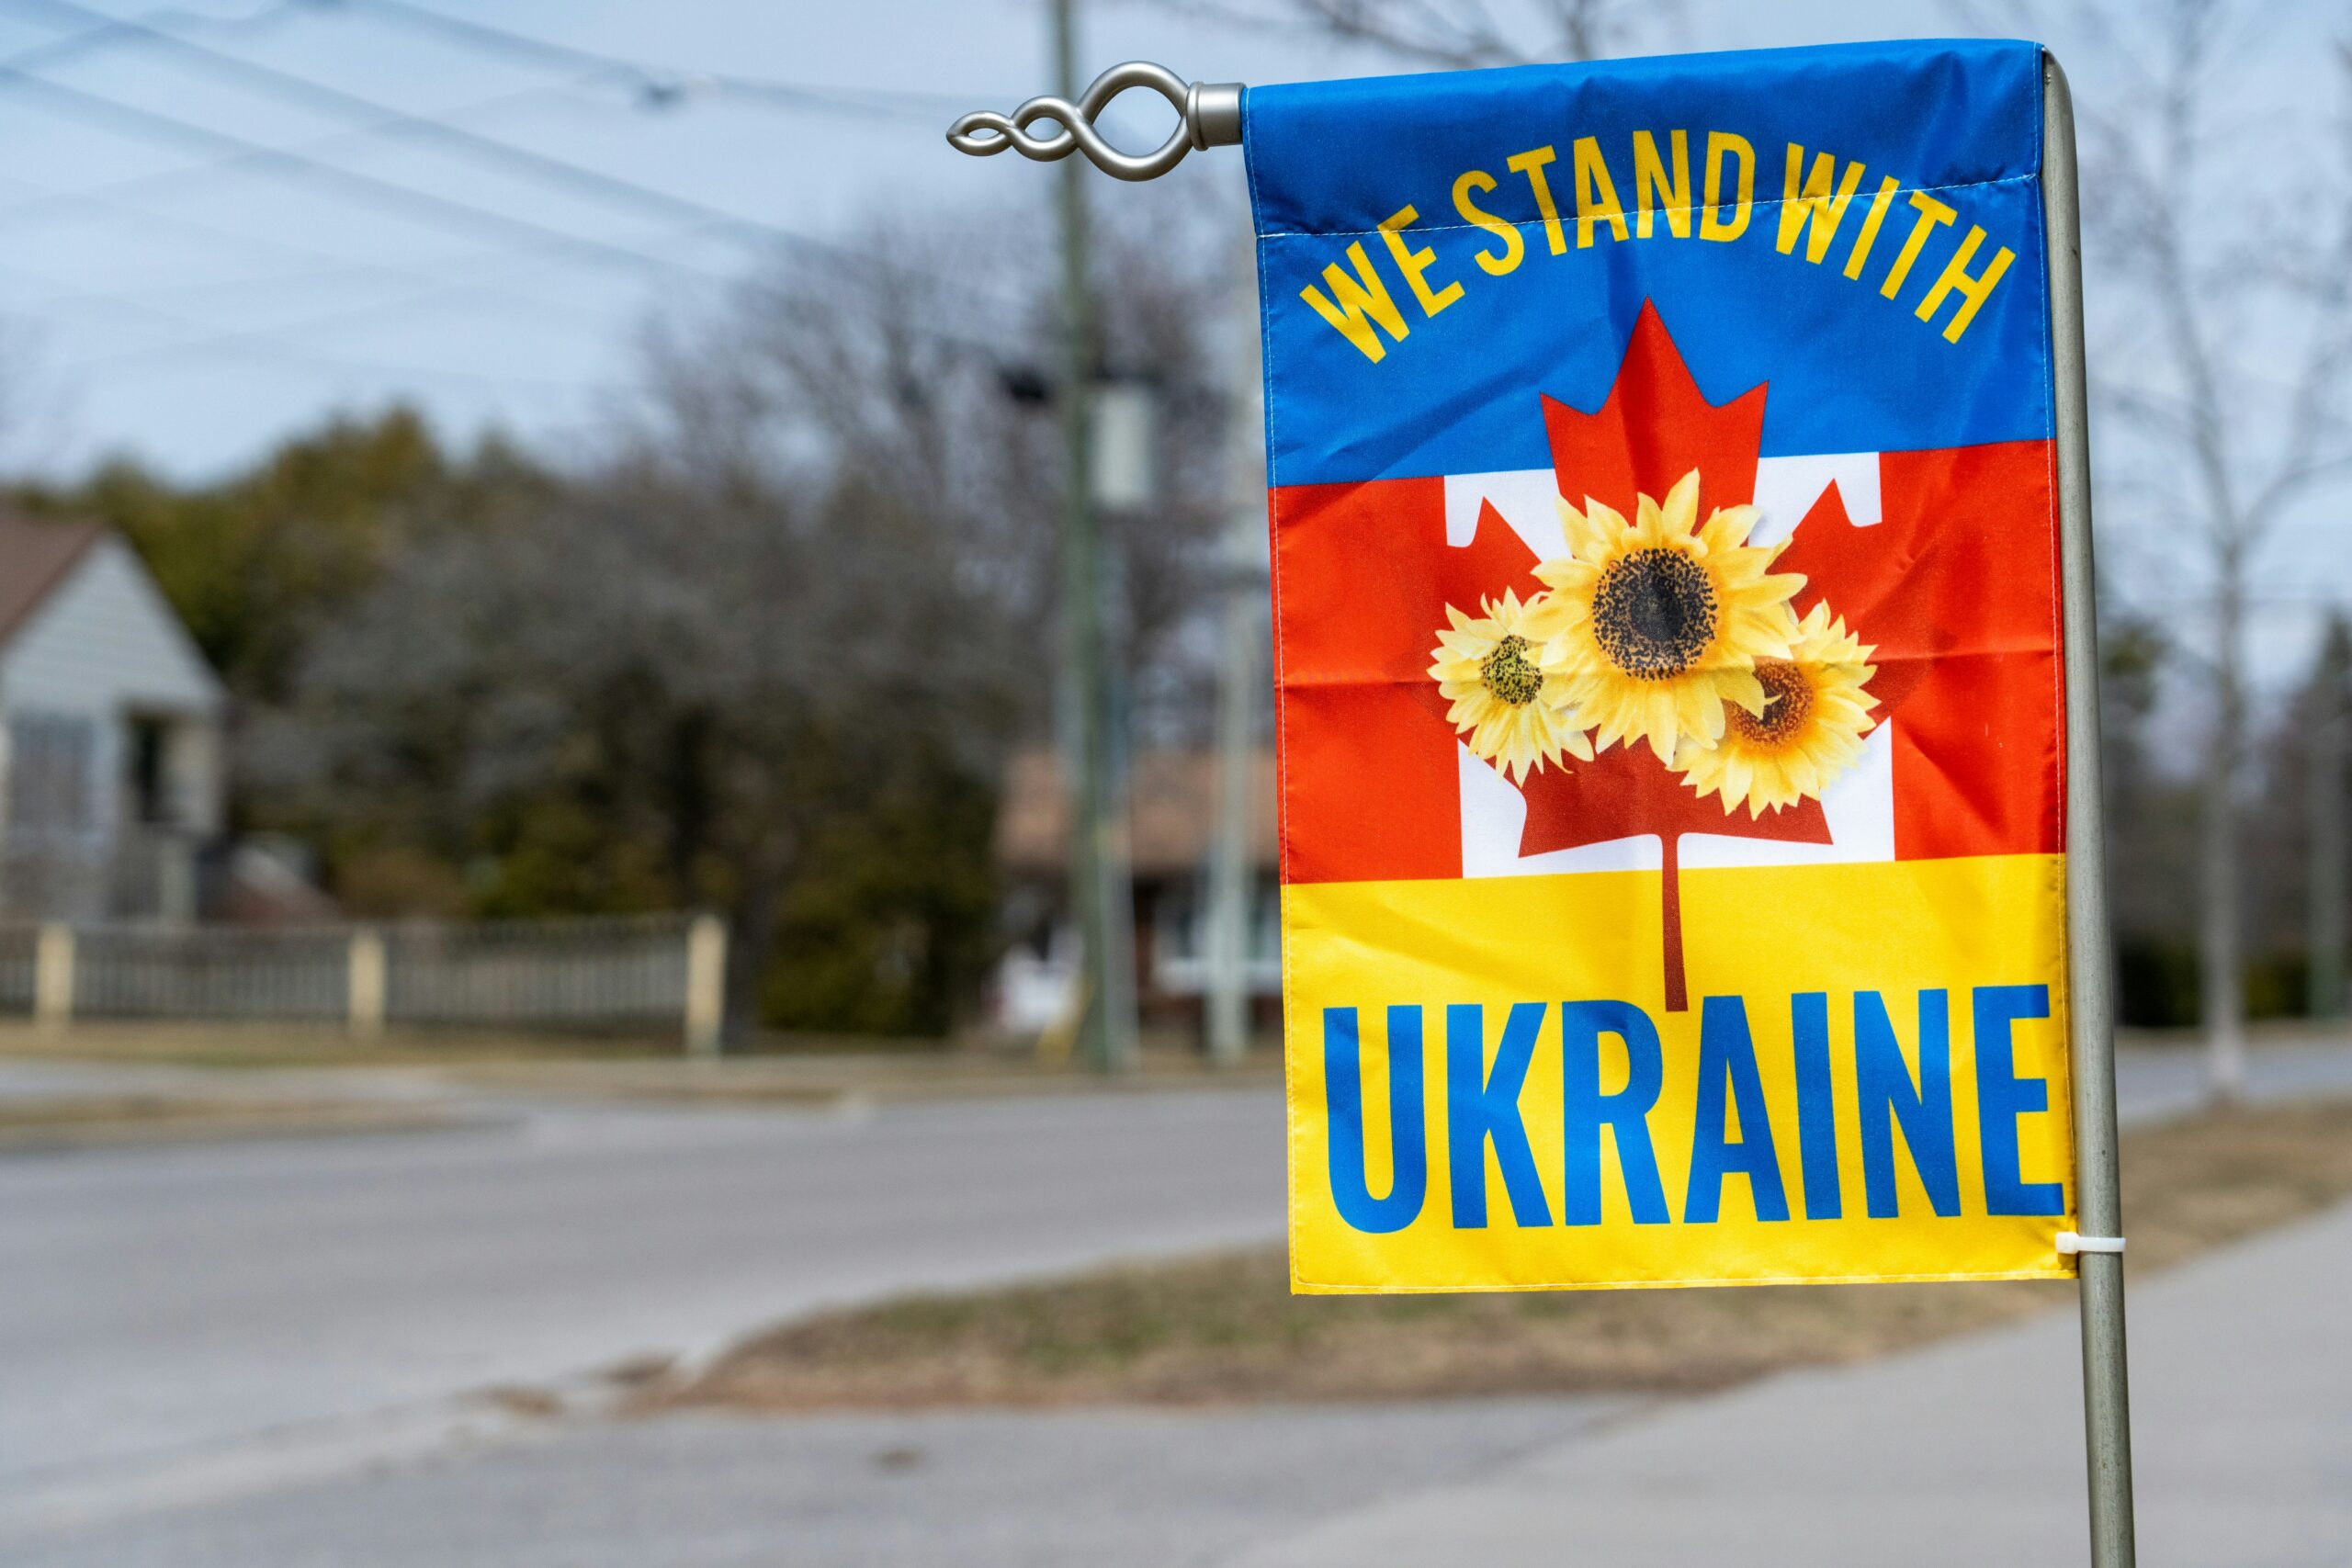 banner saying "We Stand With Ukraine"